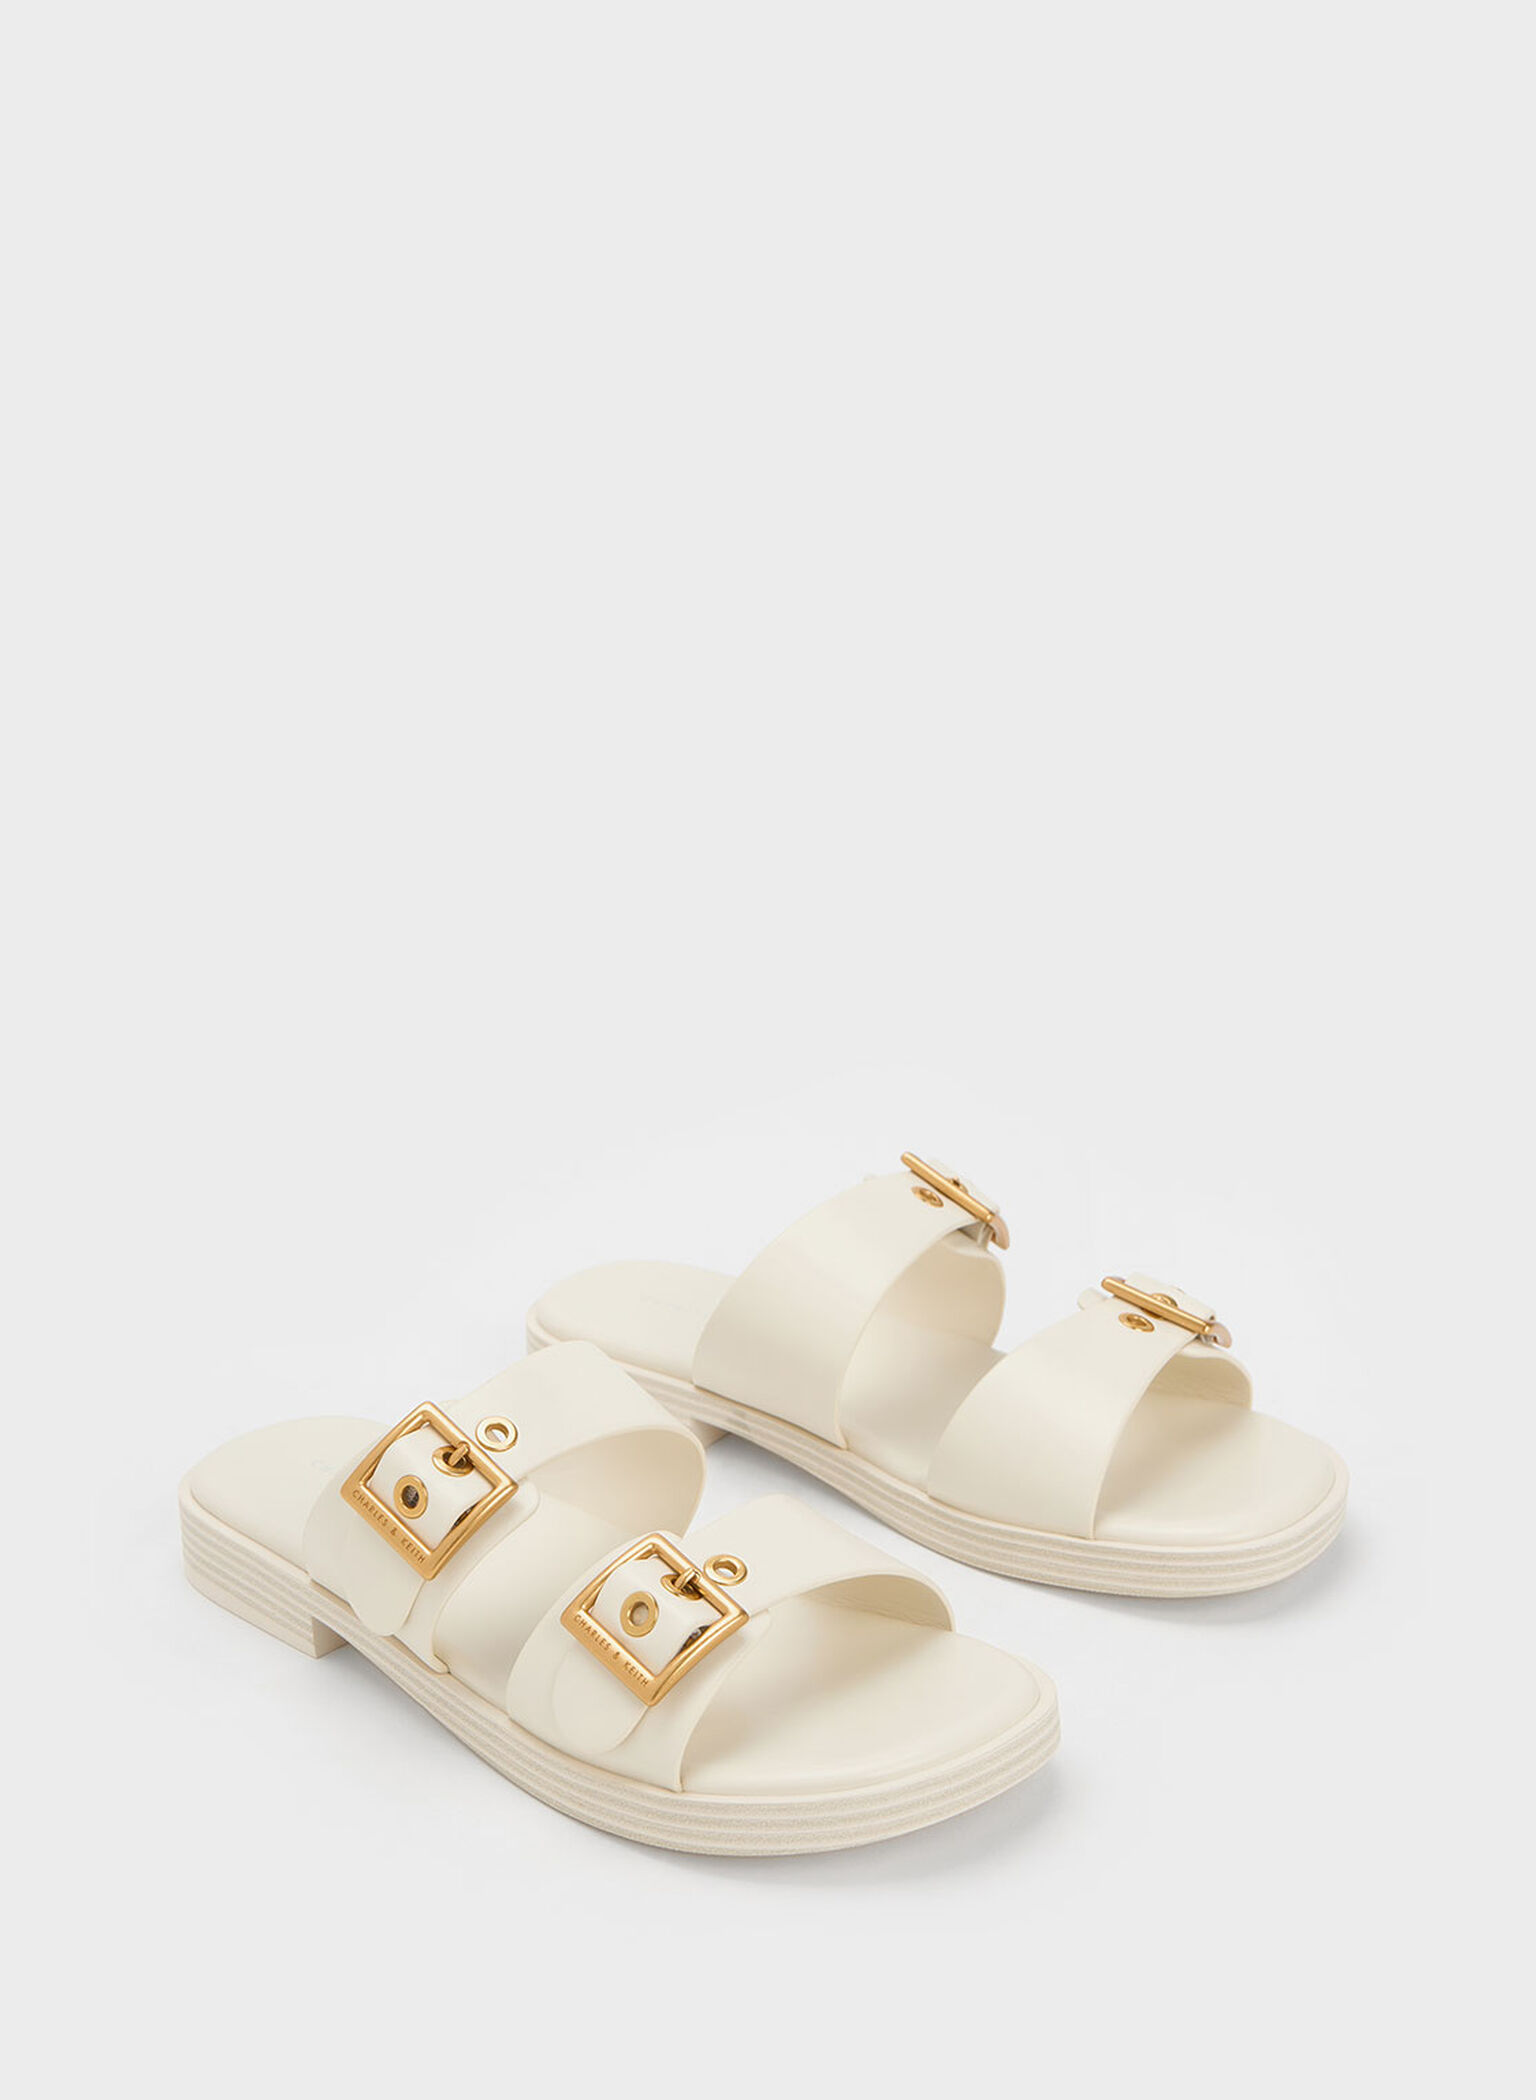 White Buckled Double Strap Slide Sandals - CHARLES & KEITH PH